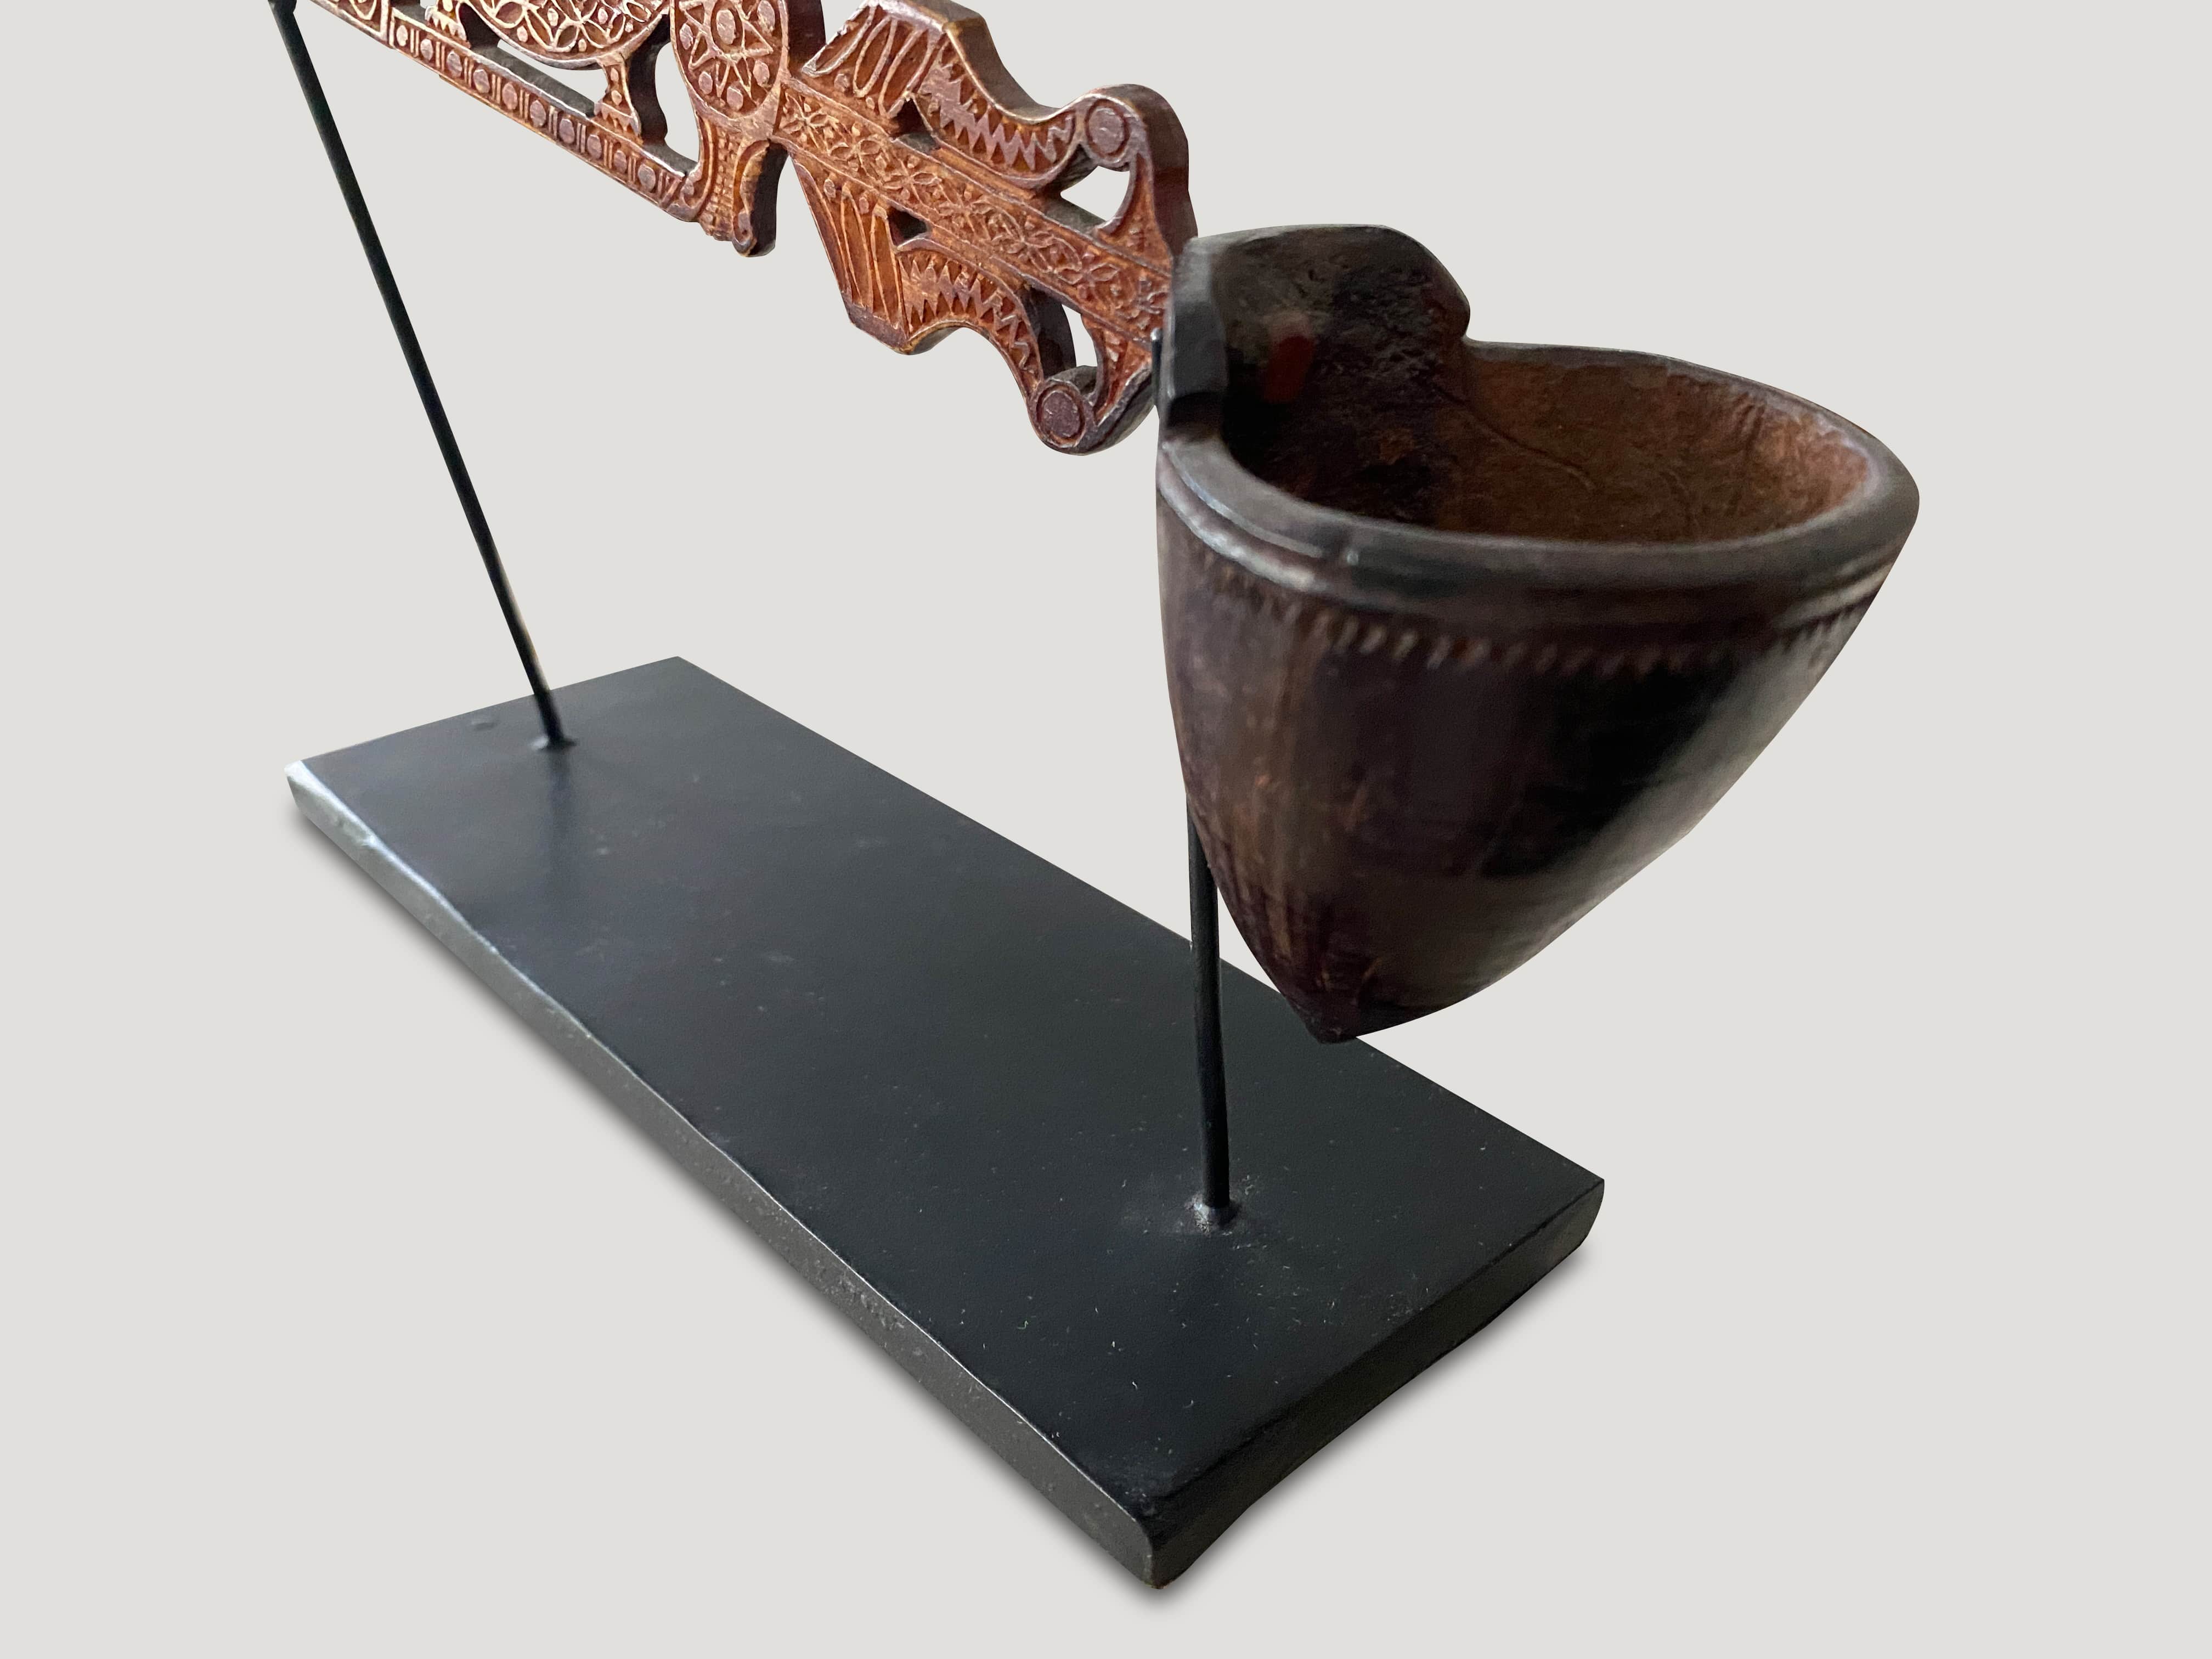 MUSEUM QUALITY HAND CARVED LADLE